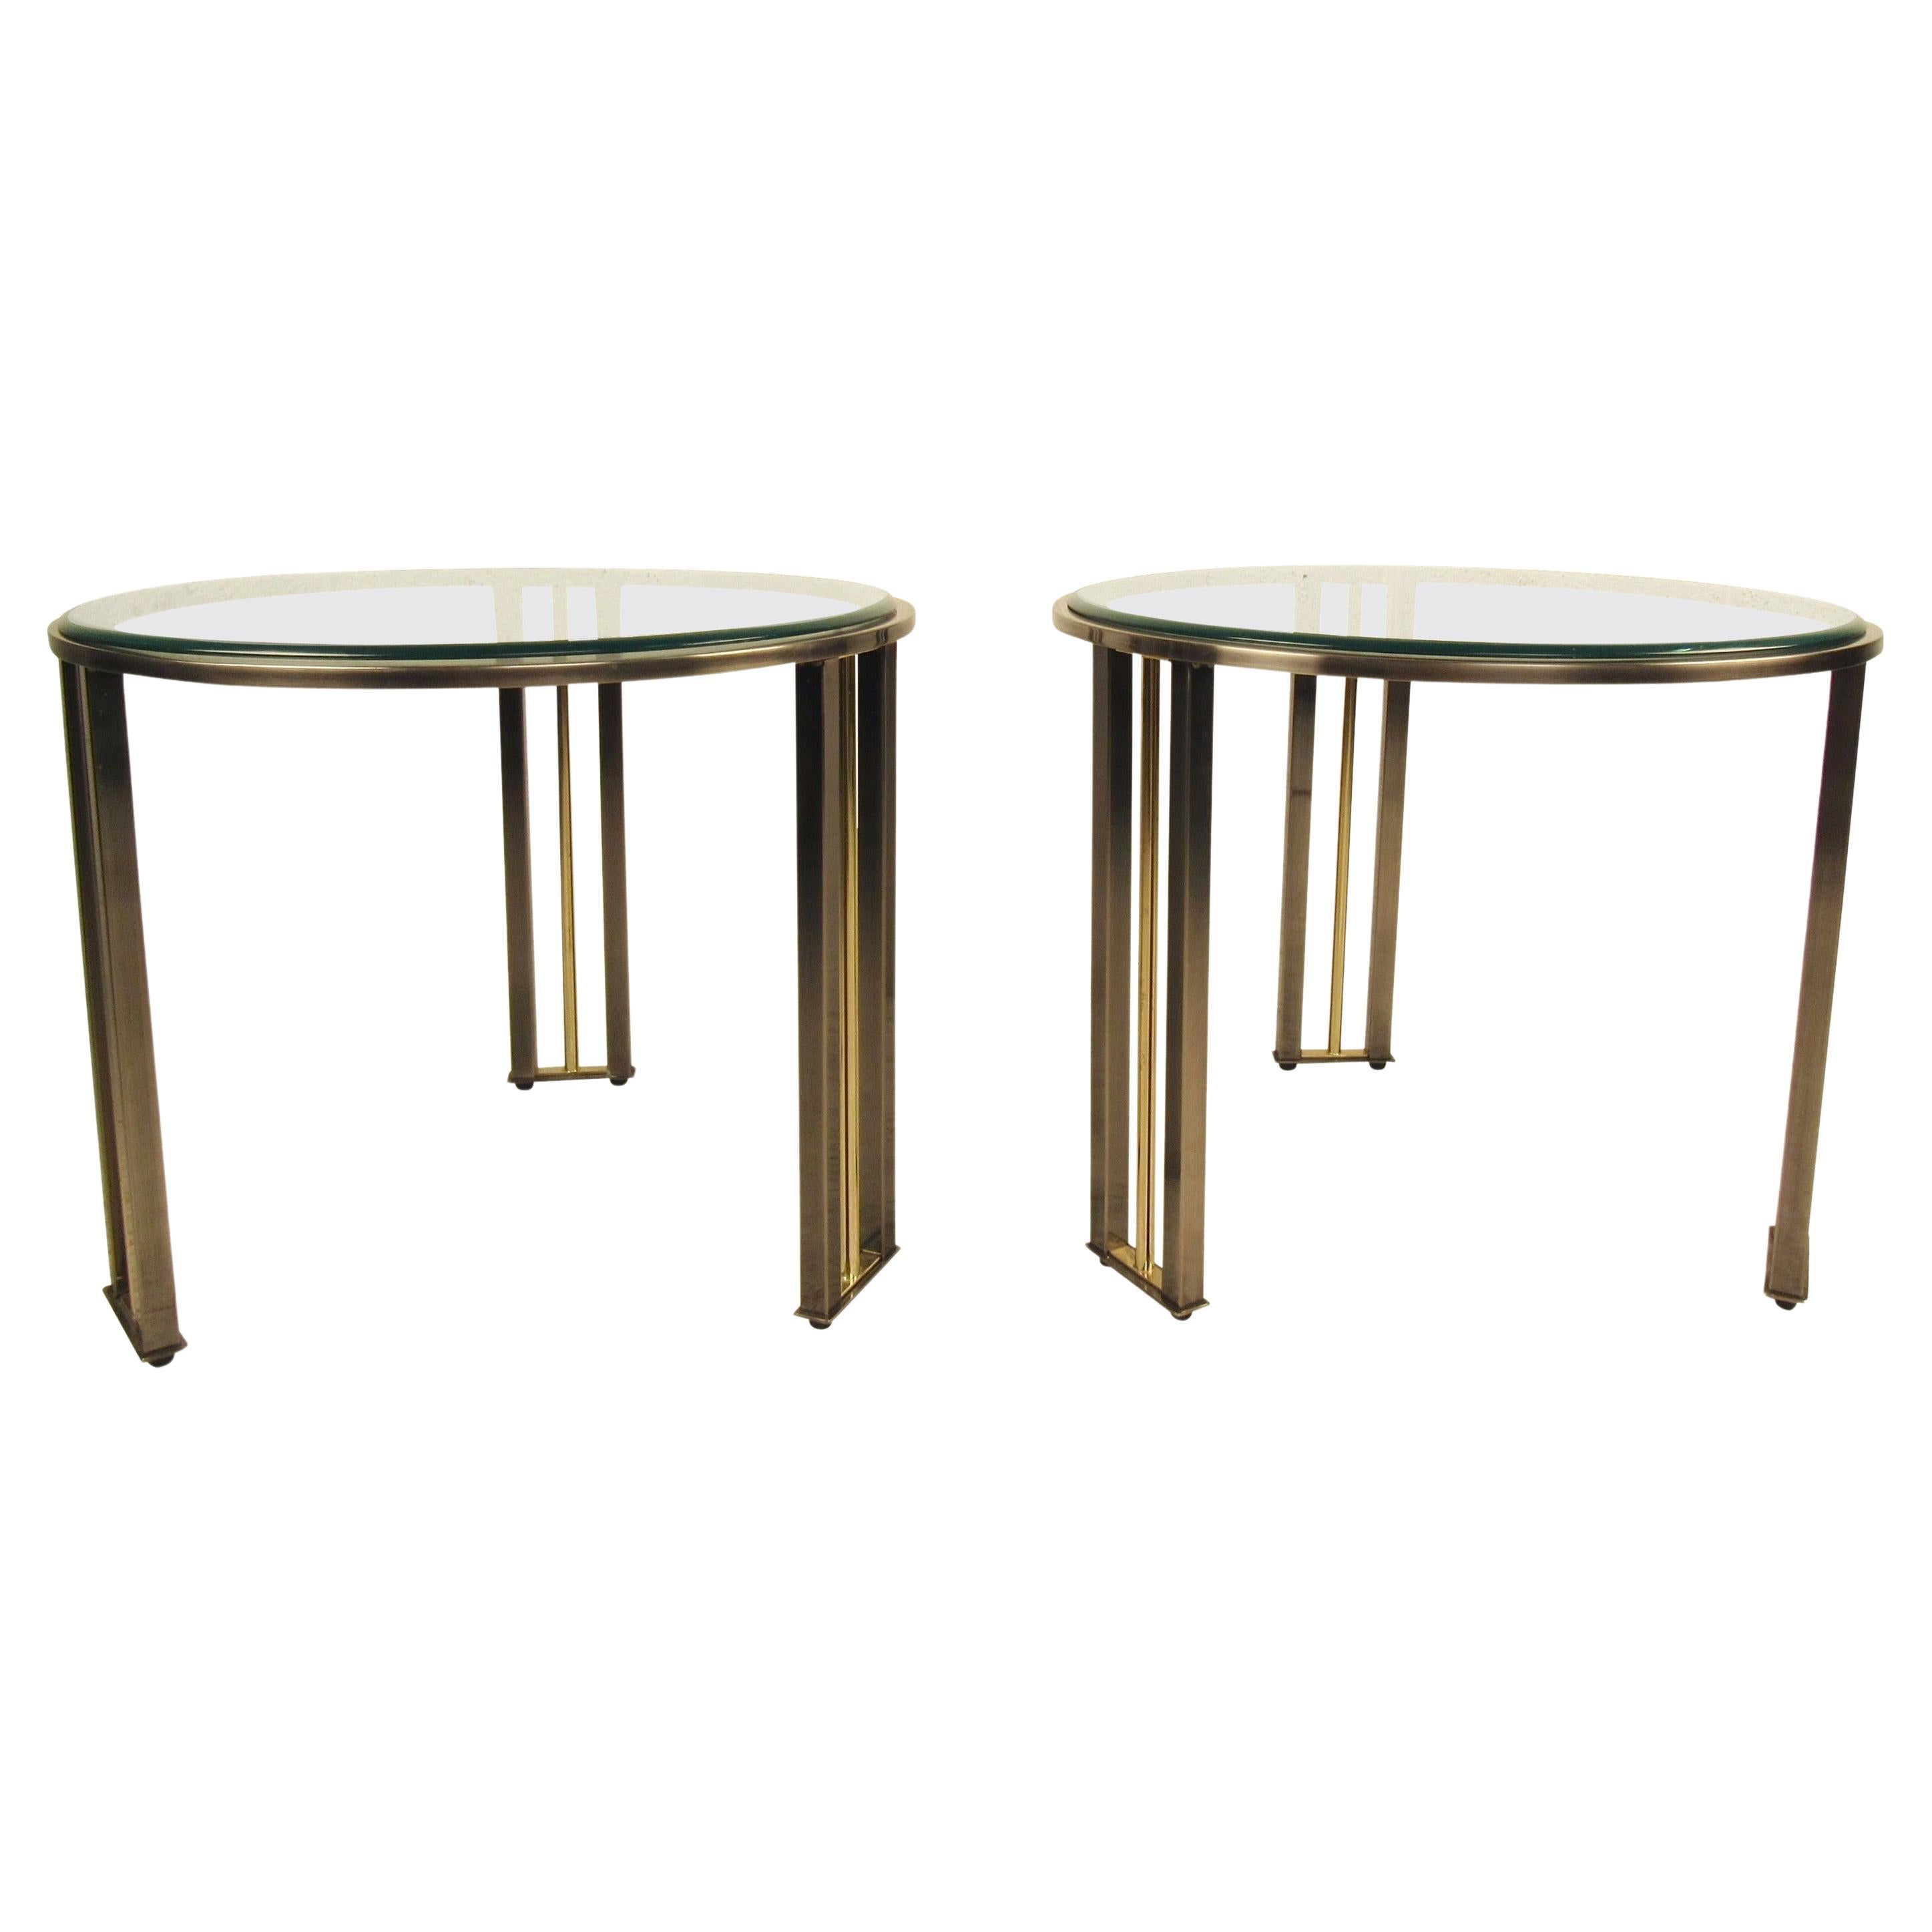 Hollywood Regency style tables with polished metal frames and round beveled glass tops. Elegant design for your modern living room.

(Please confirm item location - NY or NJ - with dealer)